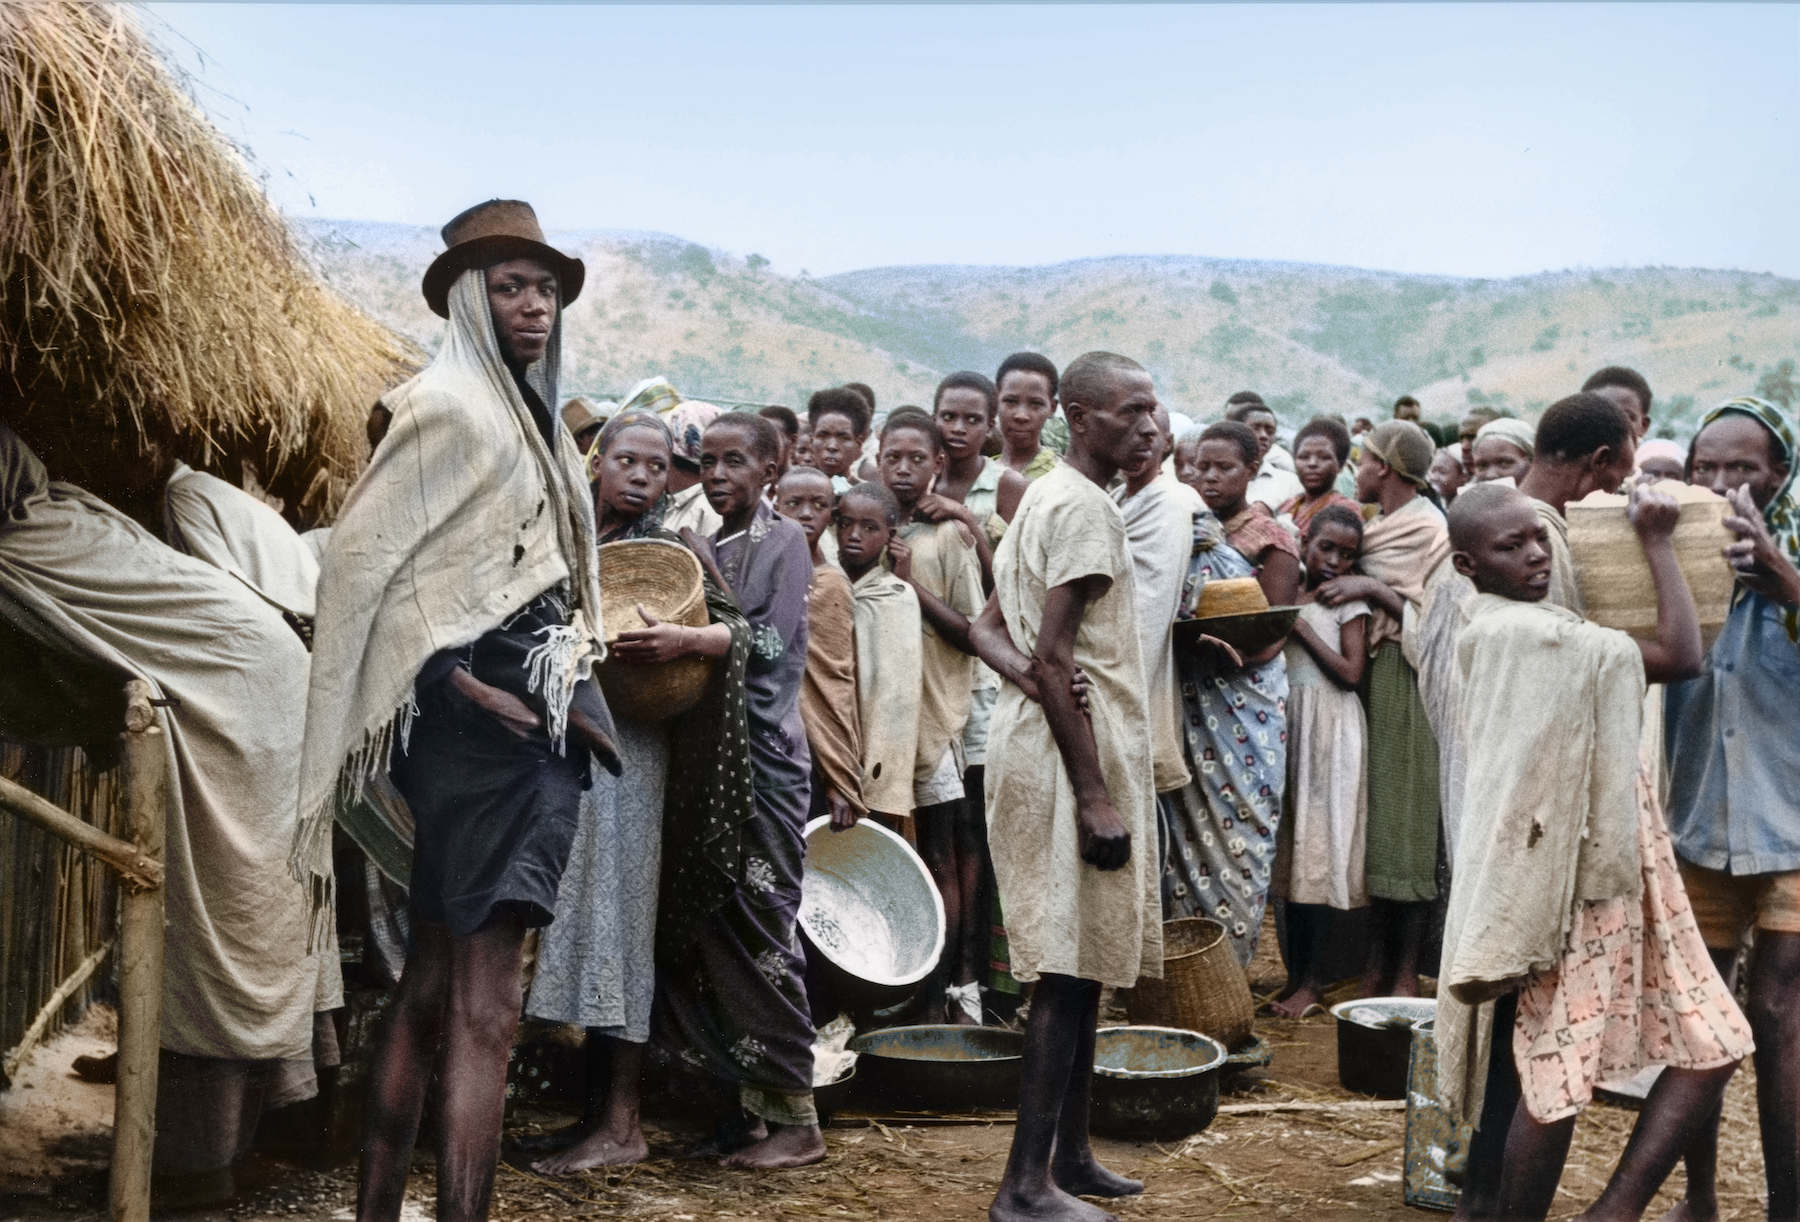 A group of Rwandese waiting for the distribution of food rations at a refugee centre in Uganda's Oruchinga Valley, 1964. Colorized picture